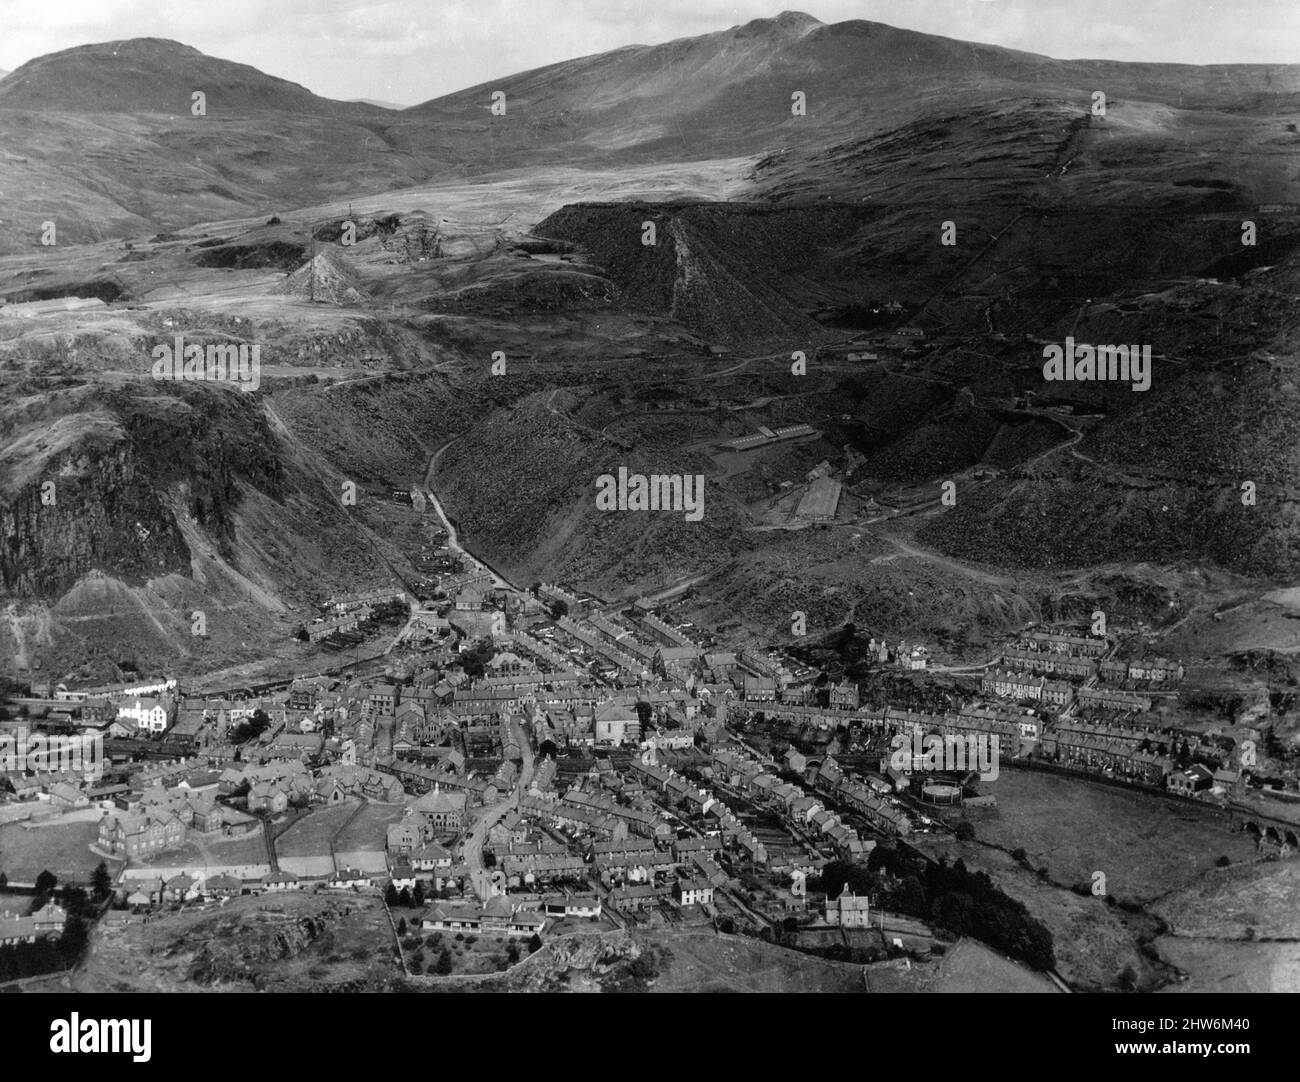 Blaenau Ffestiniog is a historic mining town in the historic county of Merionethshire, Wales, 13th May 1968. Stock Photo